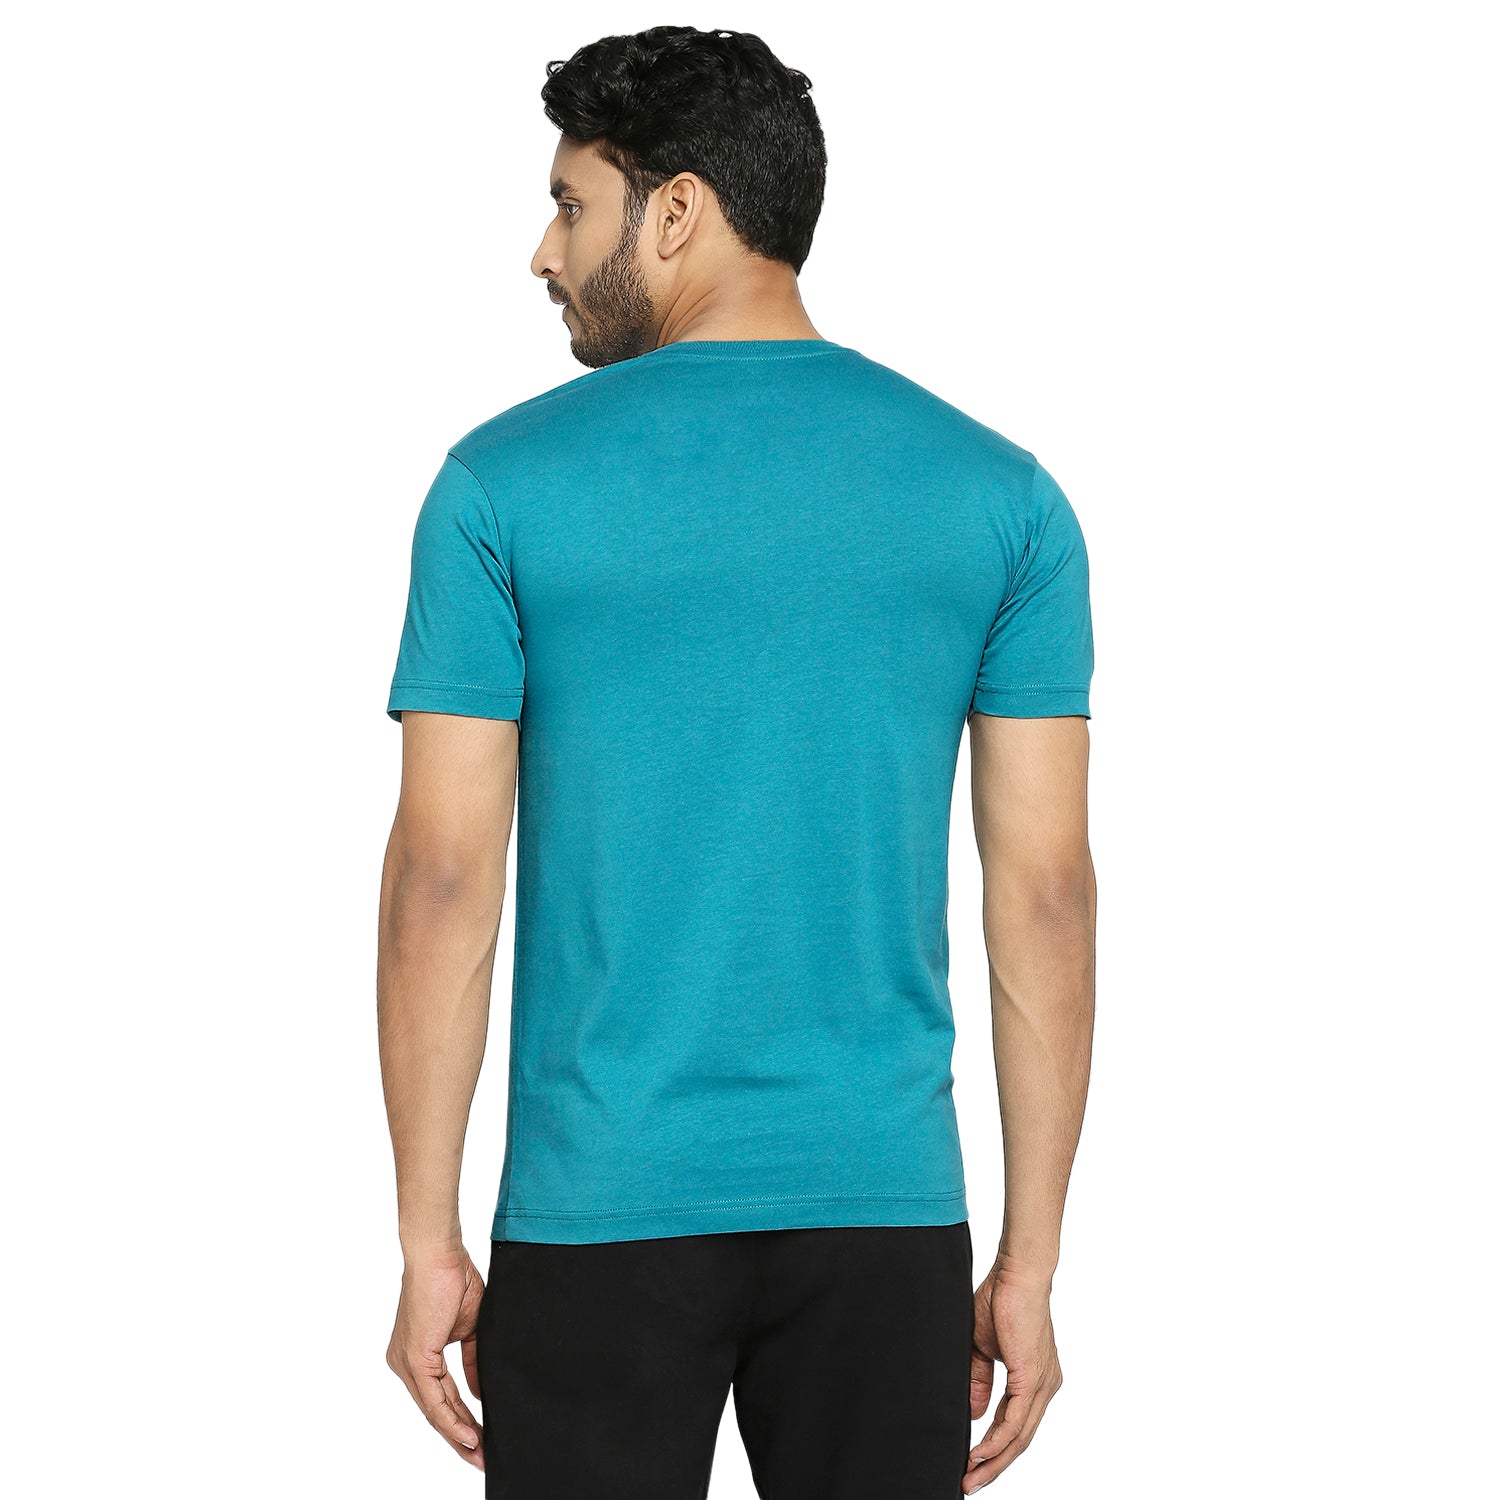 Solid Teal Everyday Essential Cotton T-Shirt for Men